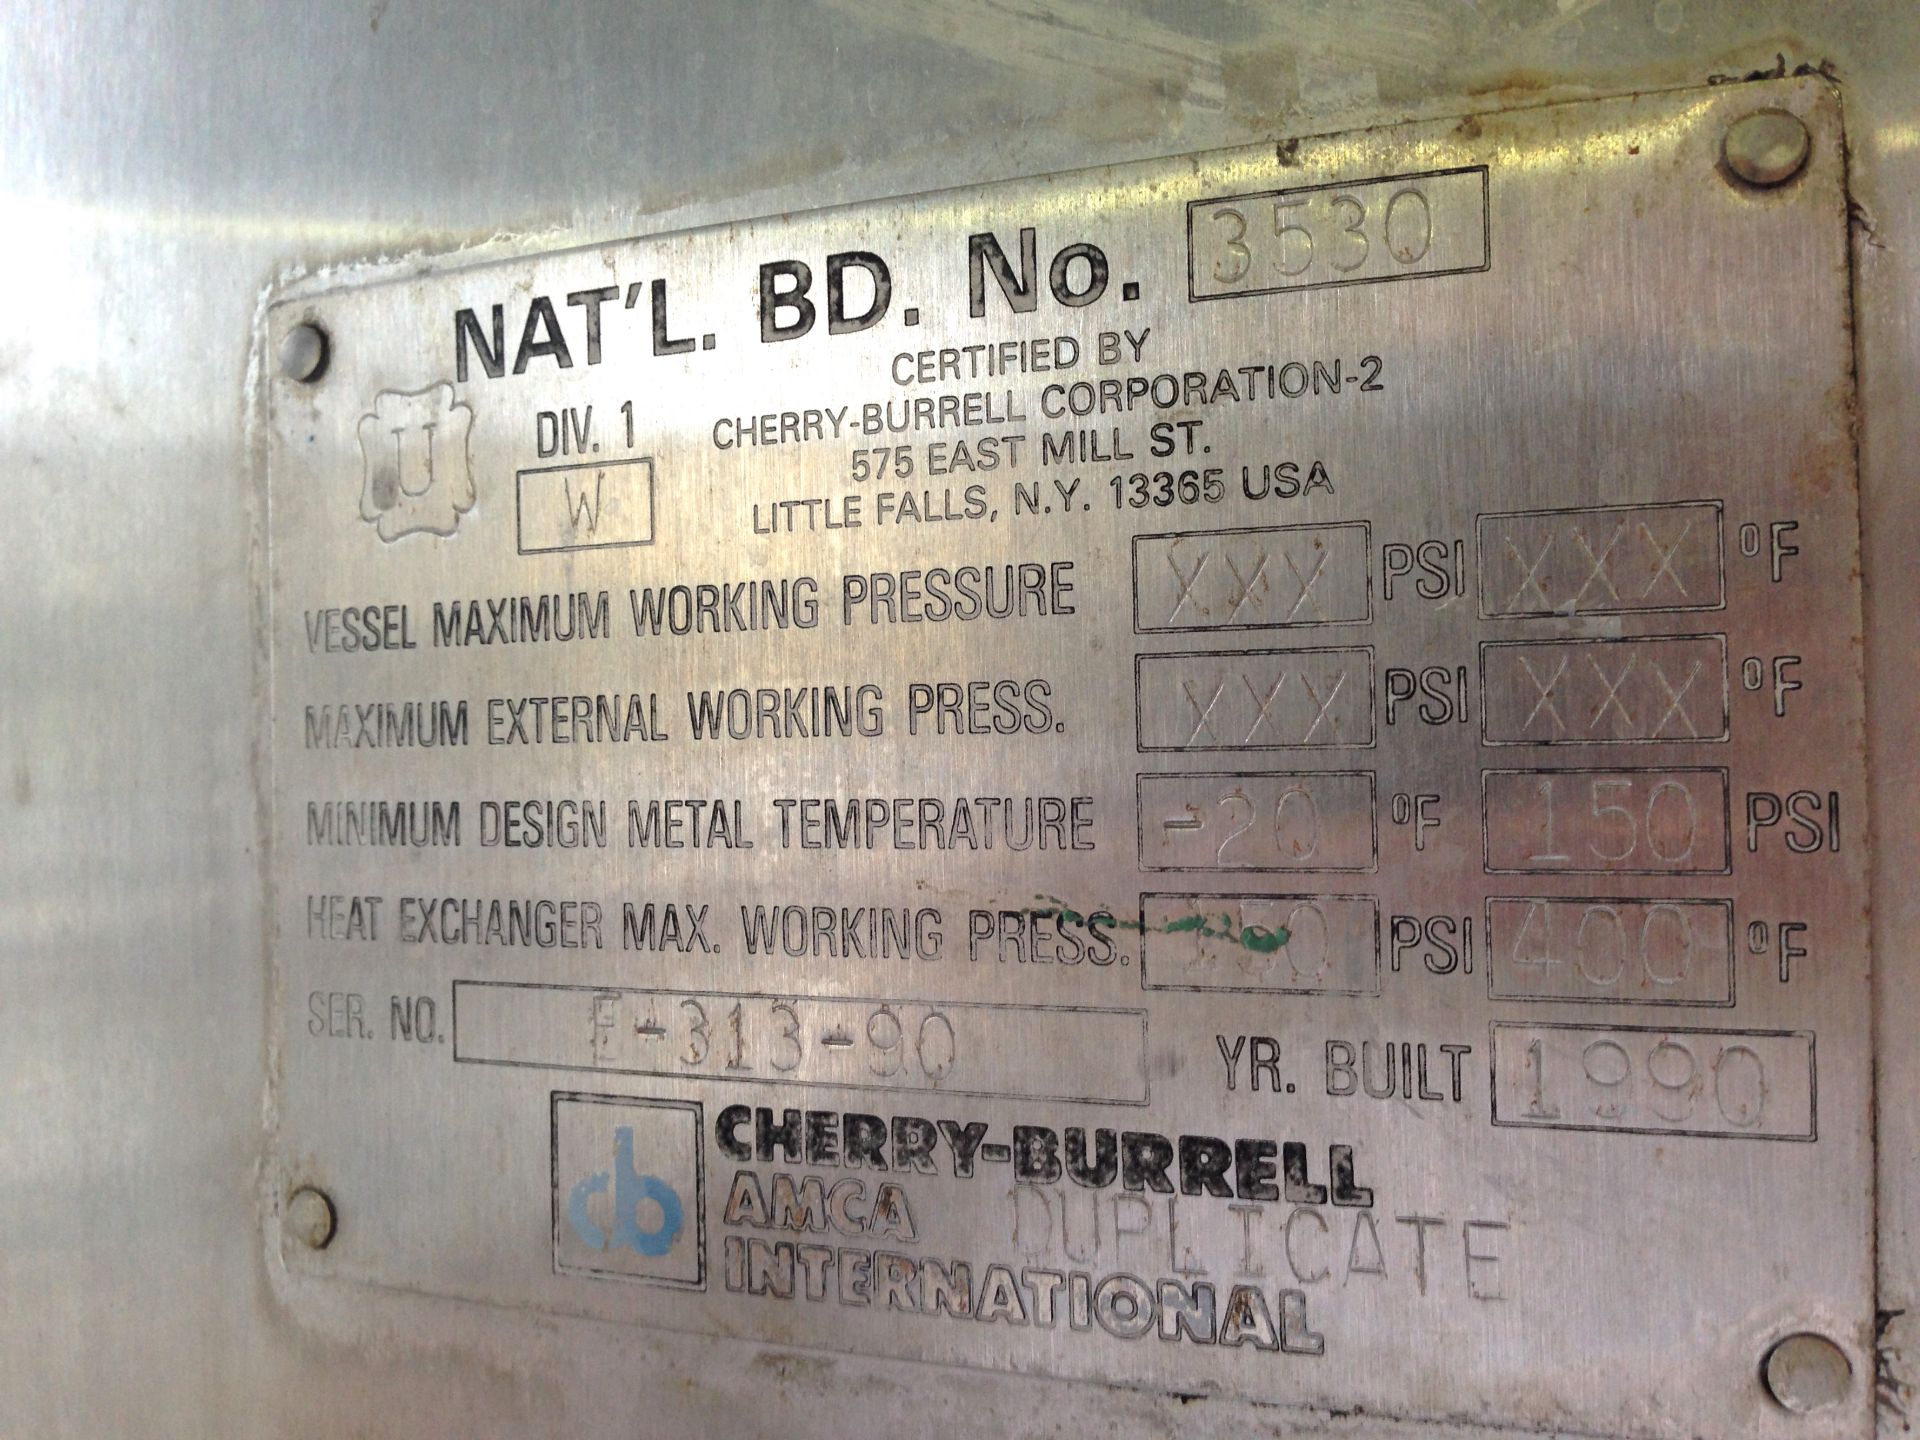 Cherry-Burrell 500 Gallon Jacketed Processor Tank Serial: E-313-90 Year: 1990316L Stainless Steel - Image 3 of 10